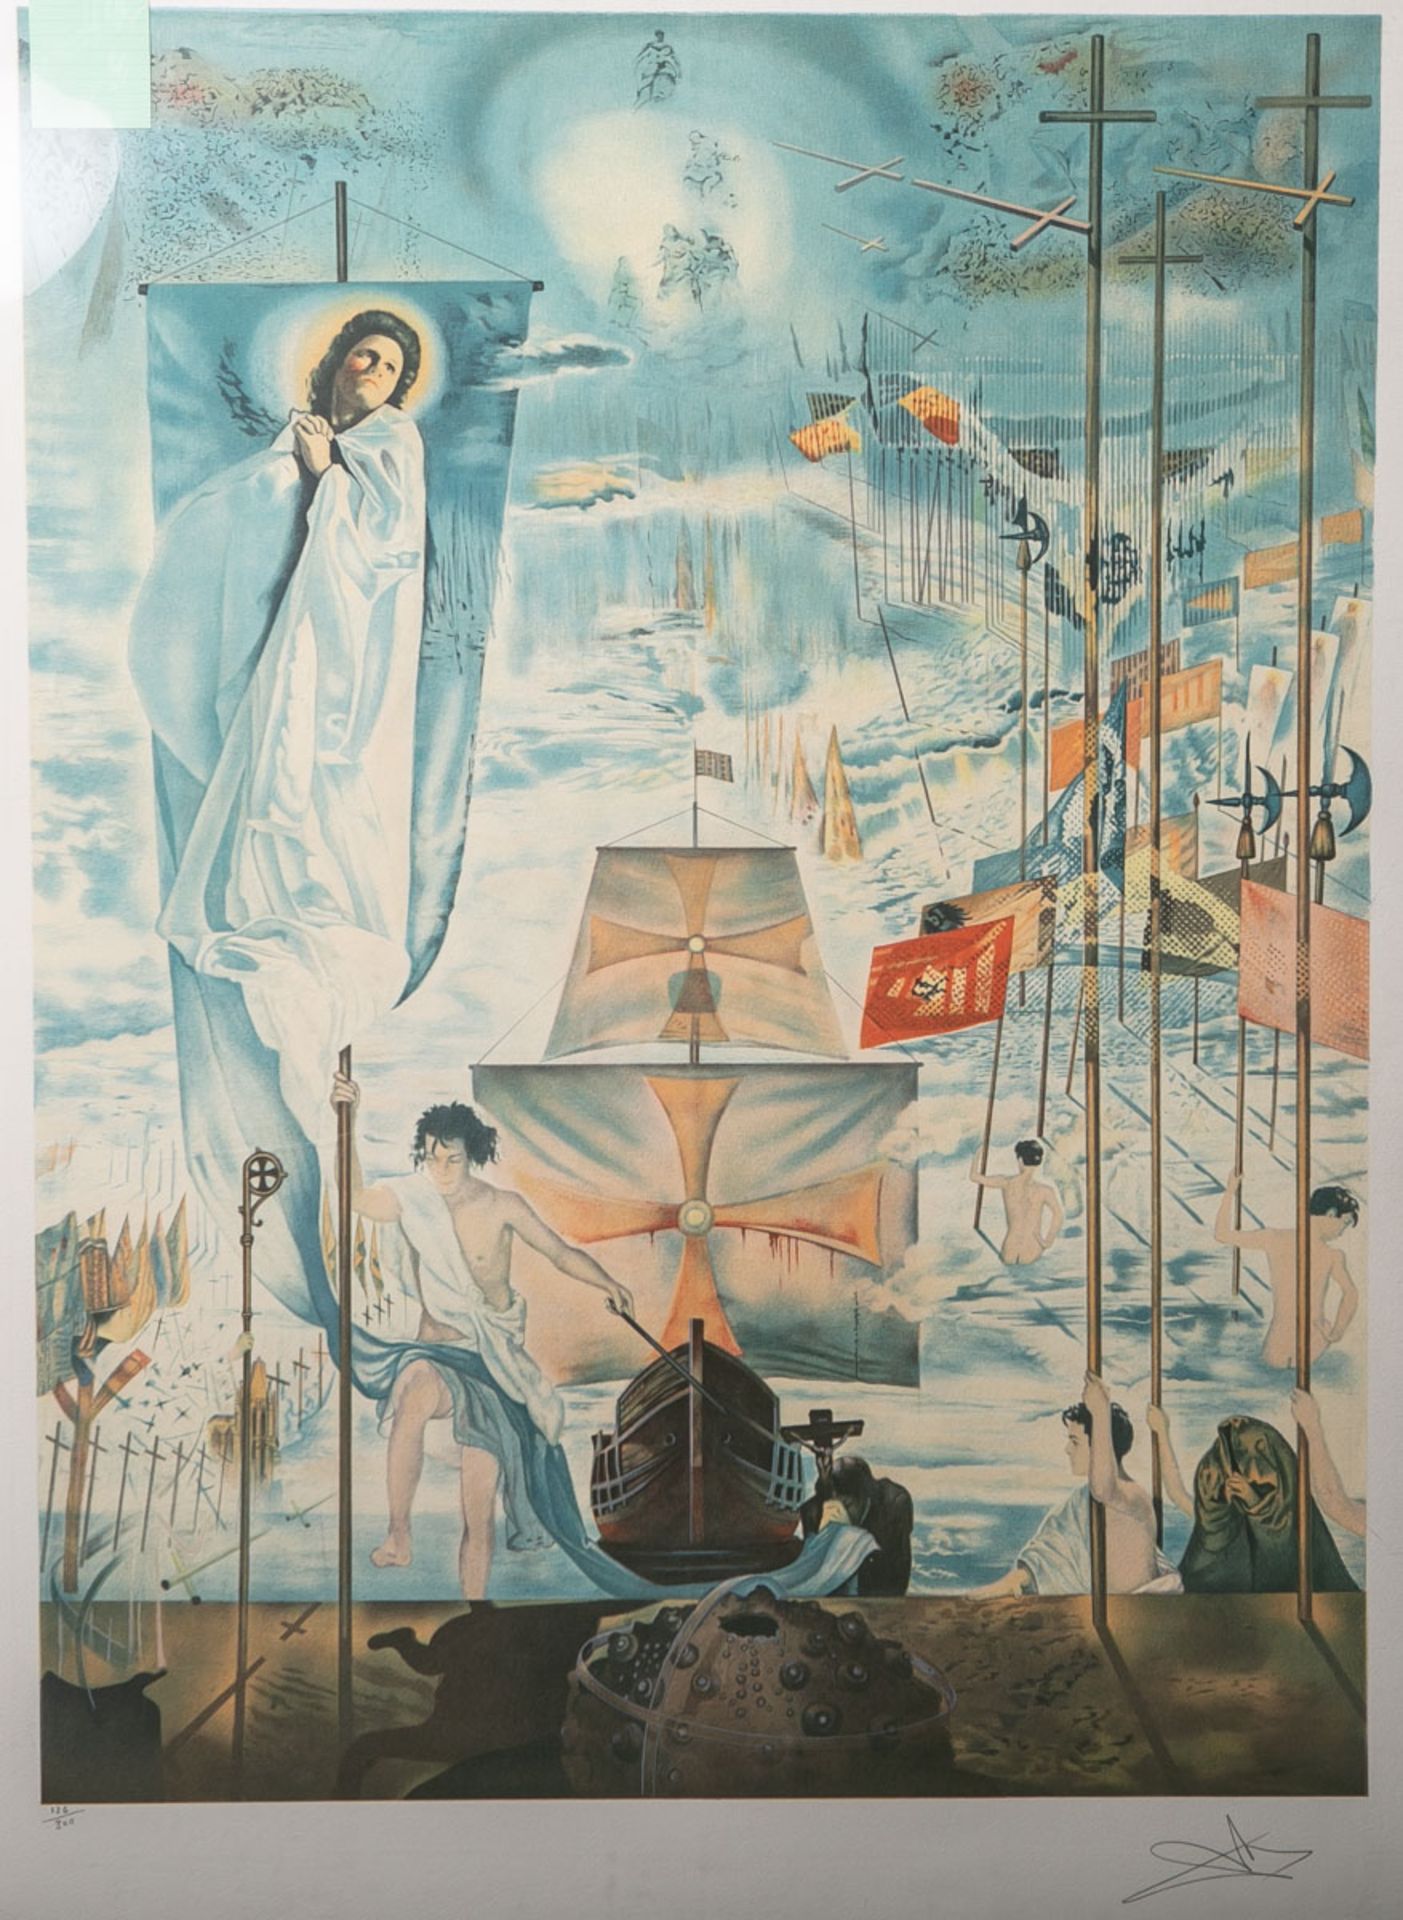 Dalí, Salvador (1904 - 1989), "The Discovery of America by Christopher Columbus"